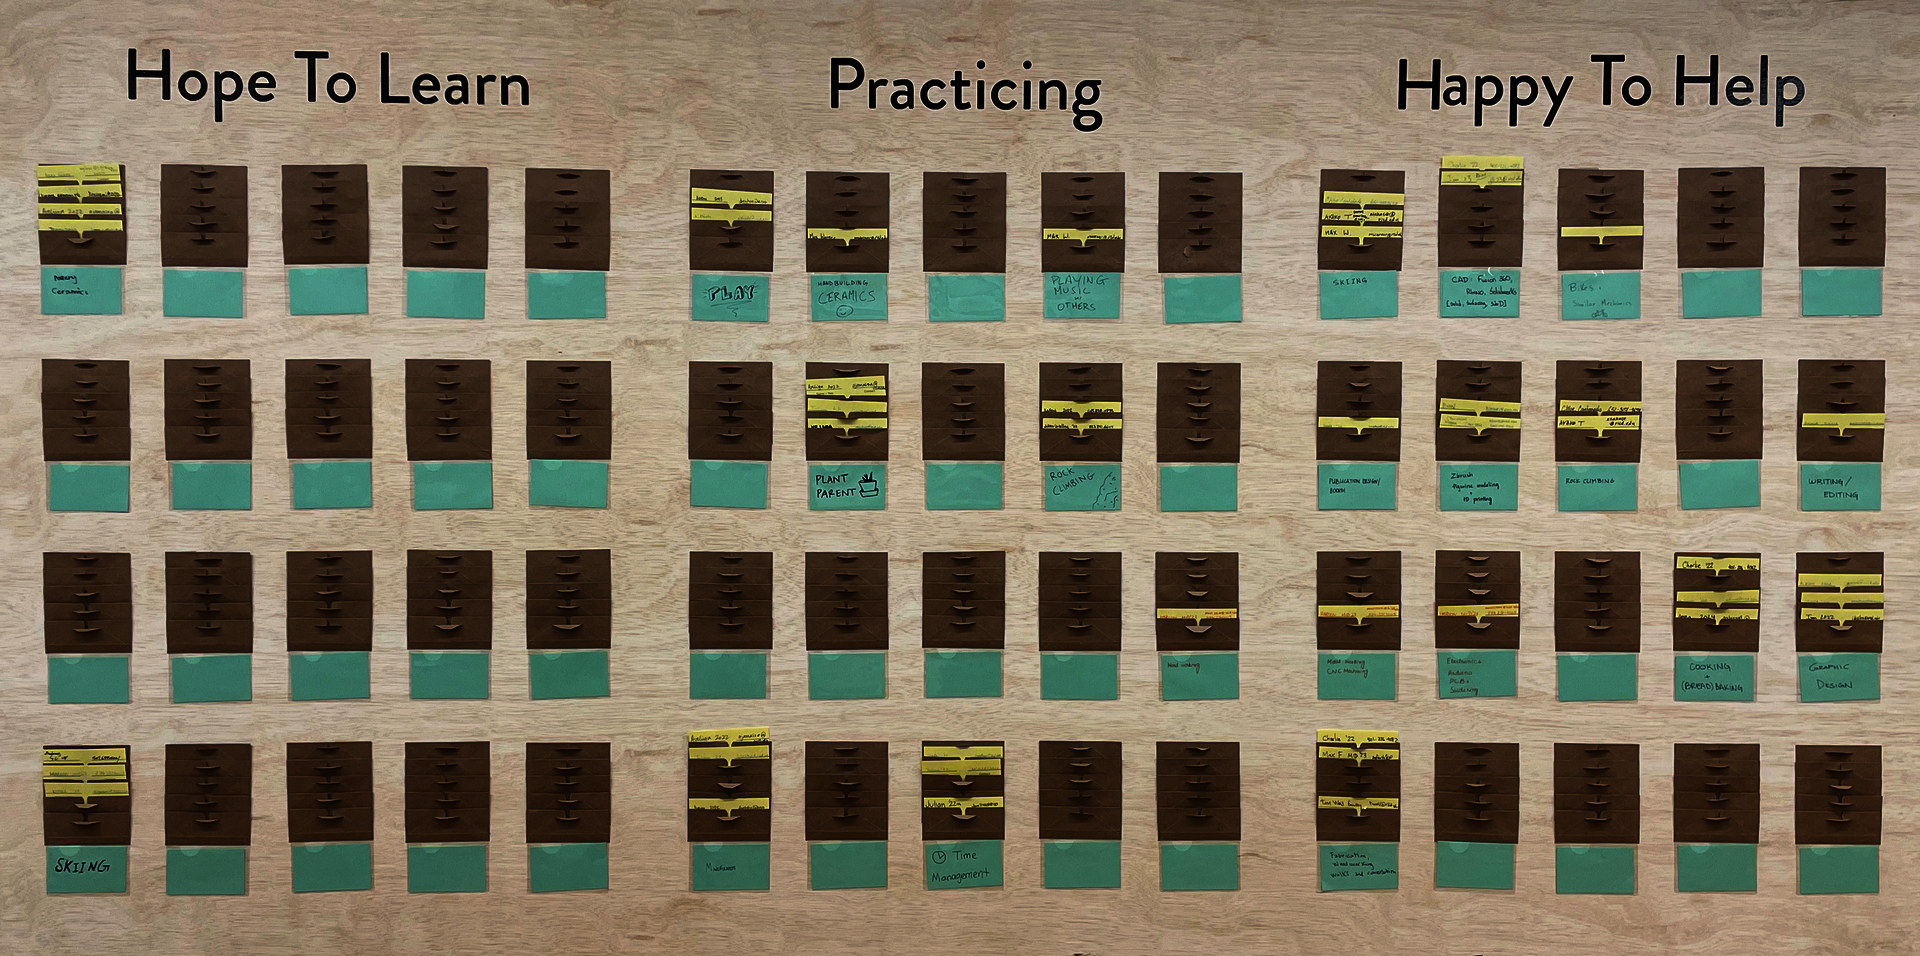 A wall mounted raw plywood board with three sections: Hope To Learn, Practicing, and Happy To Help. Each section has a grid of stacked envelopes where people have left yellow cads. 